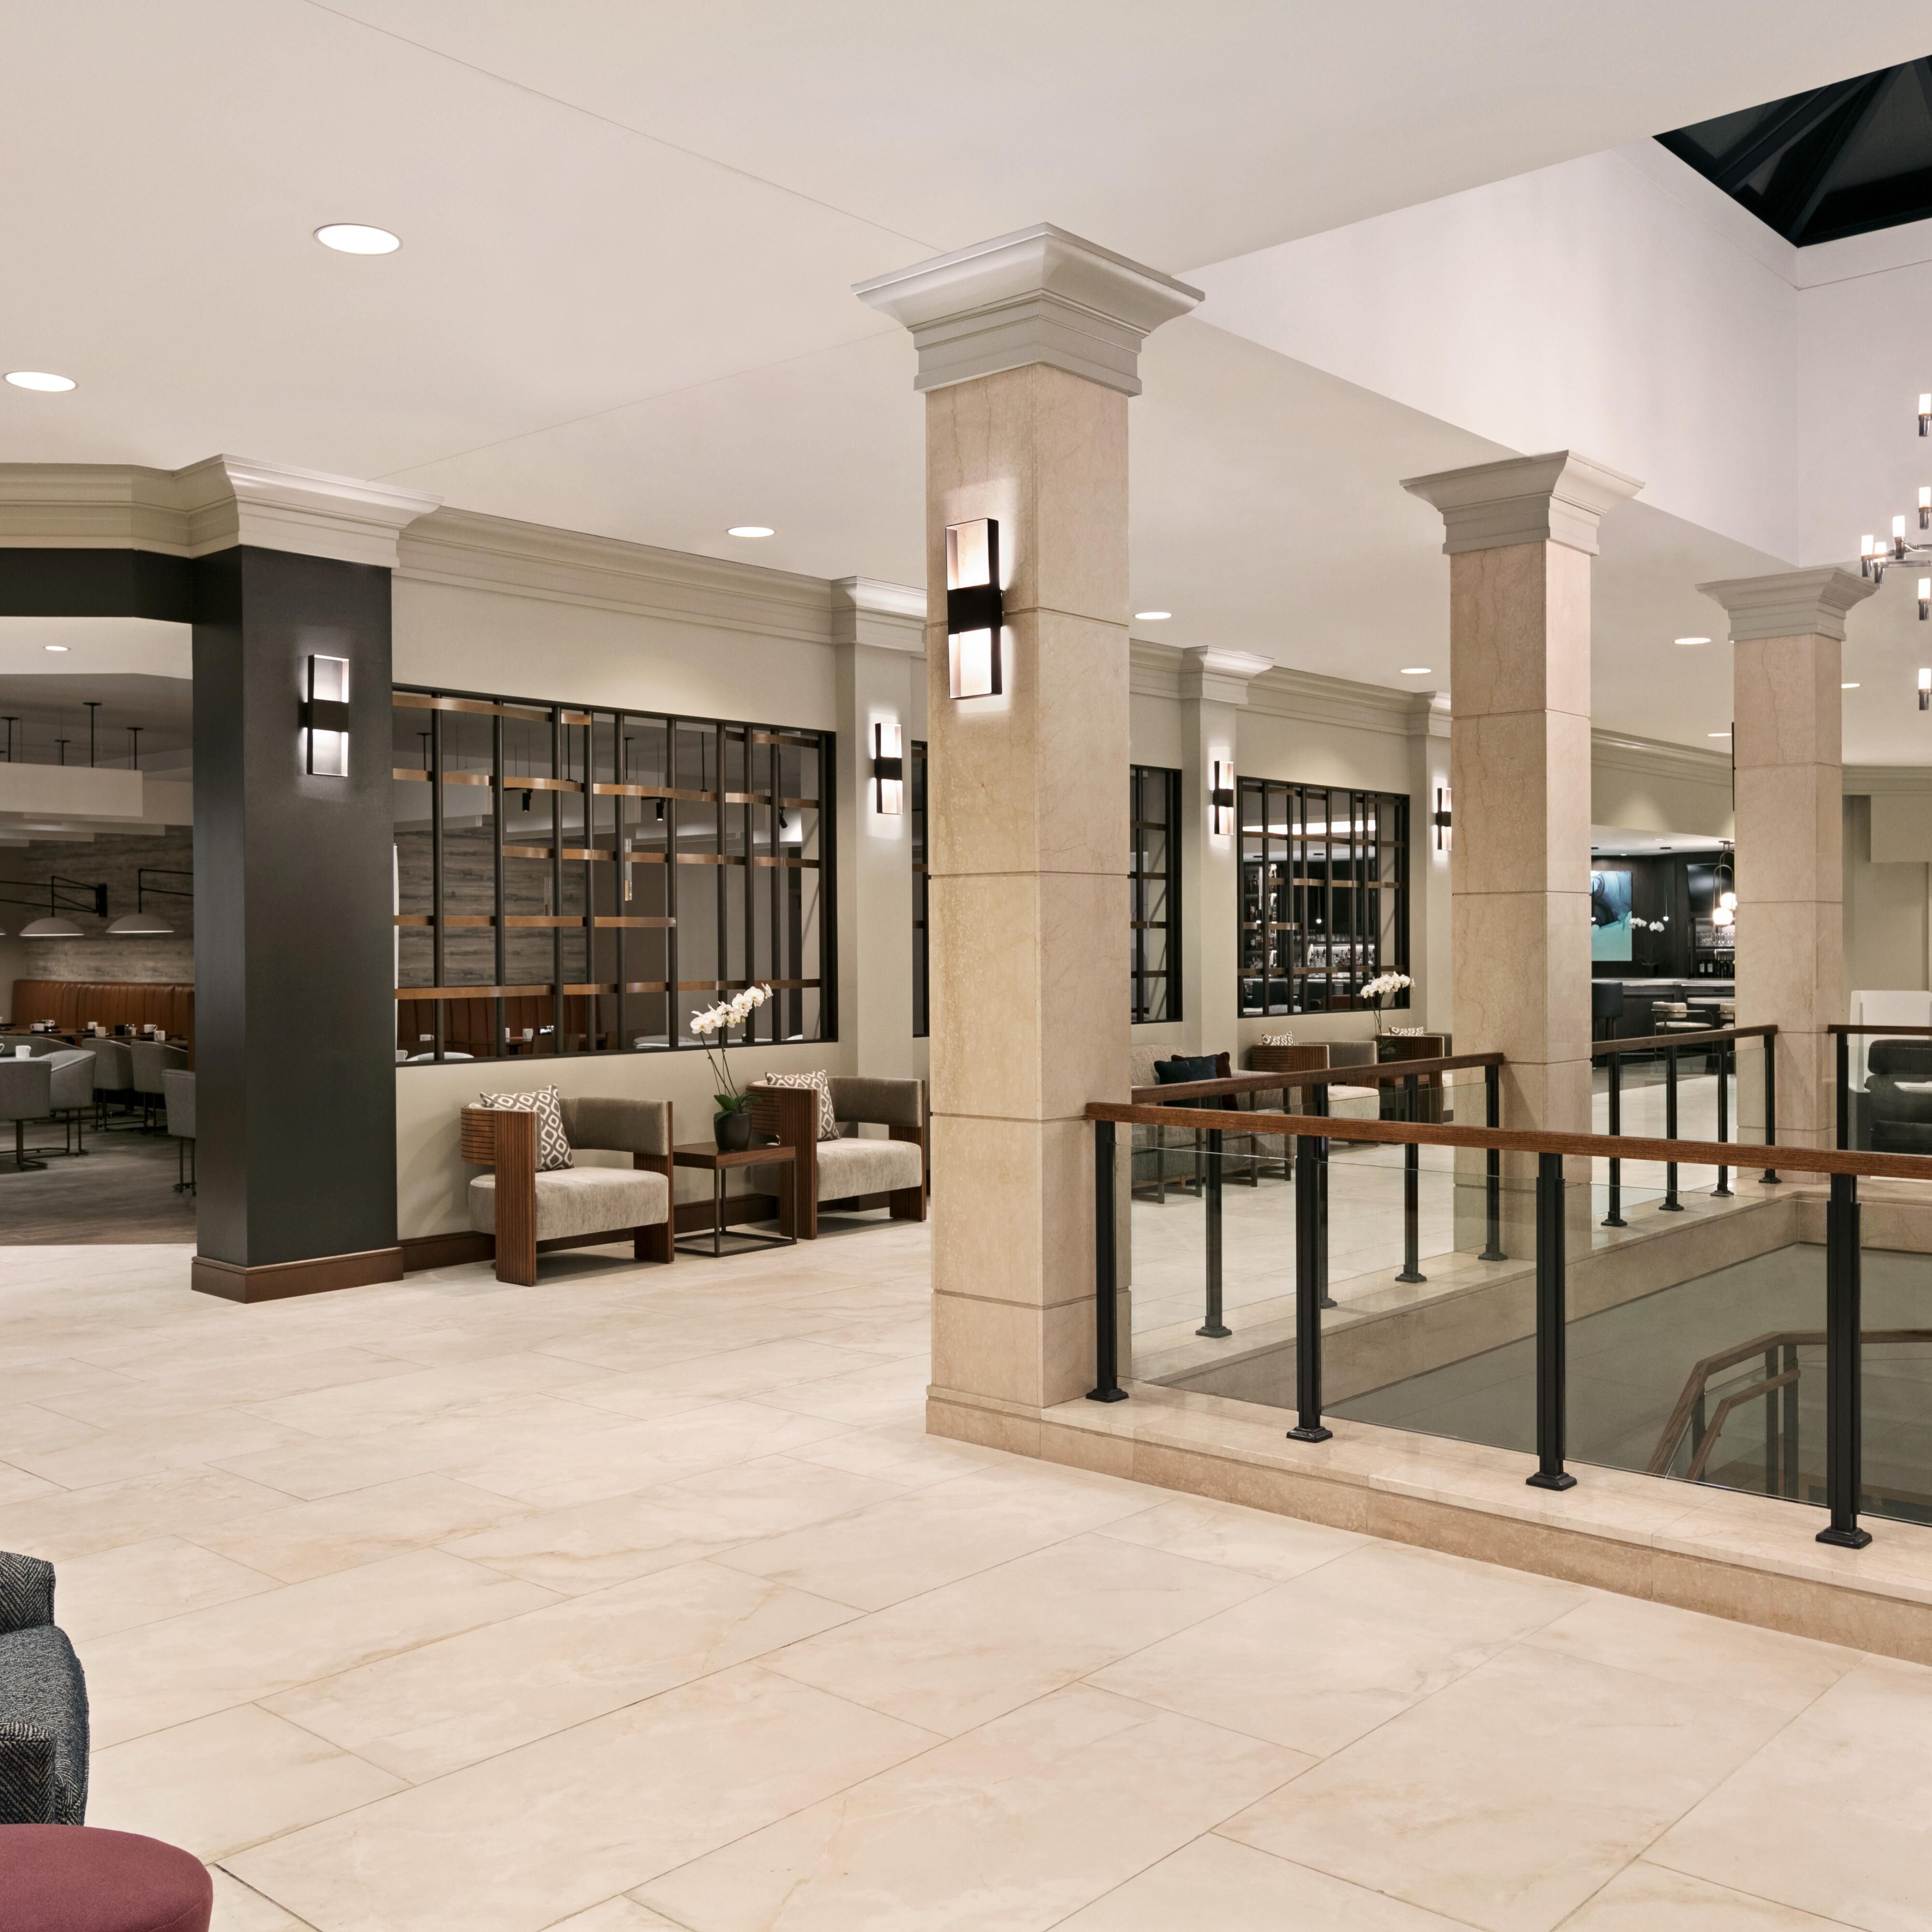 Our newly renovated lobby features ample seating with food service